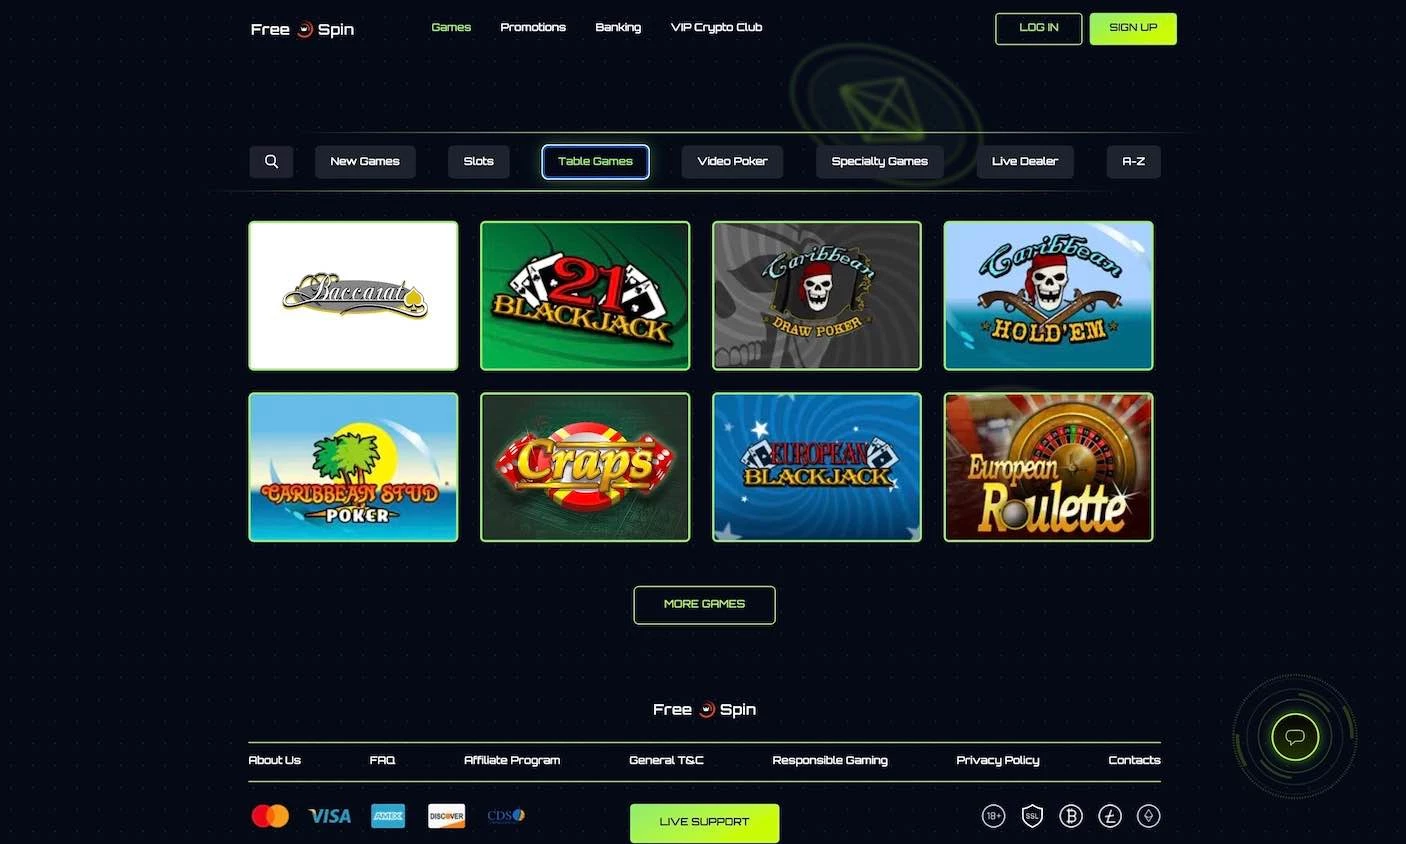 Free spin casino table games